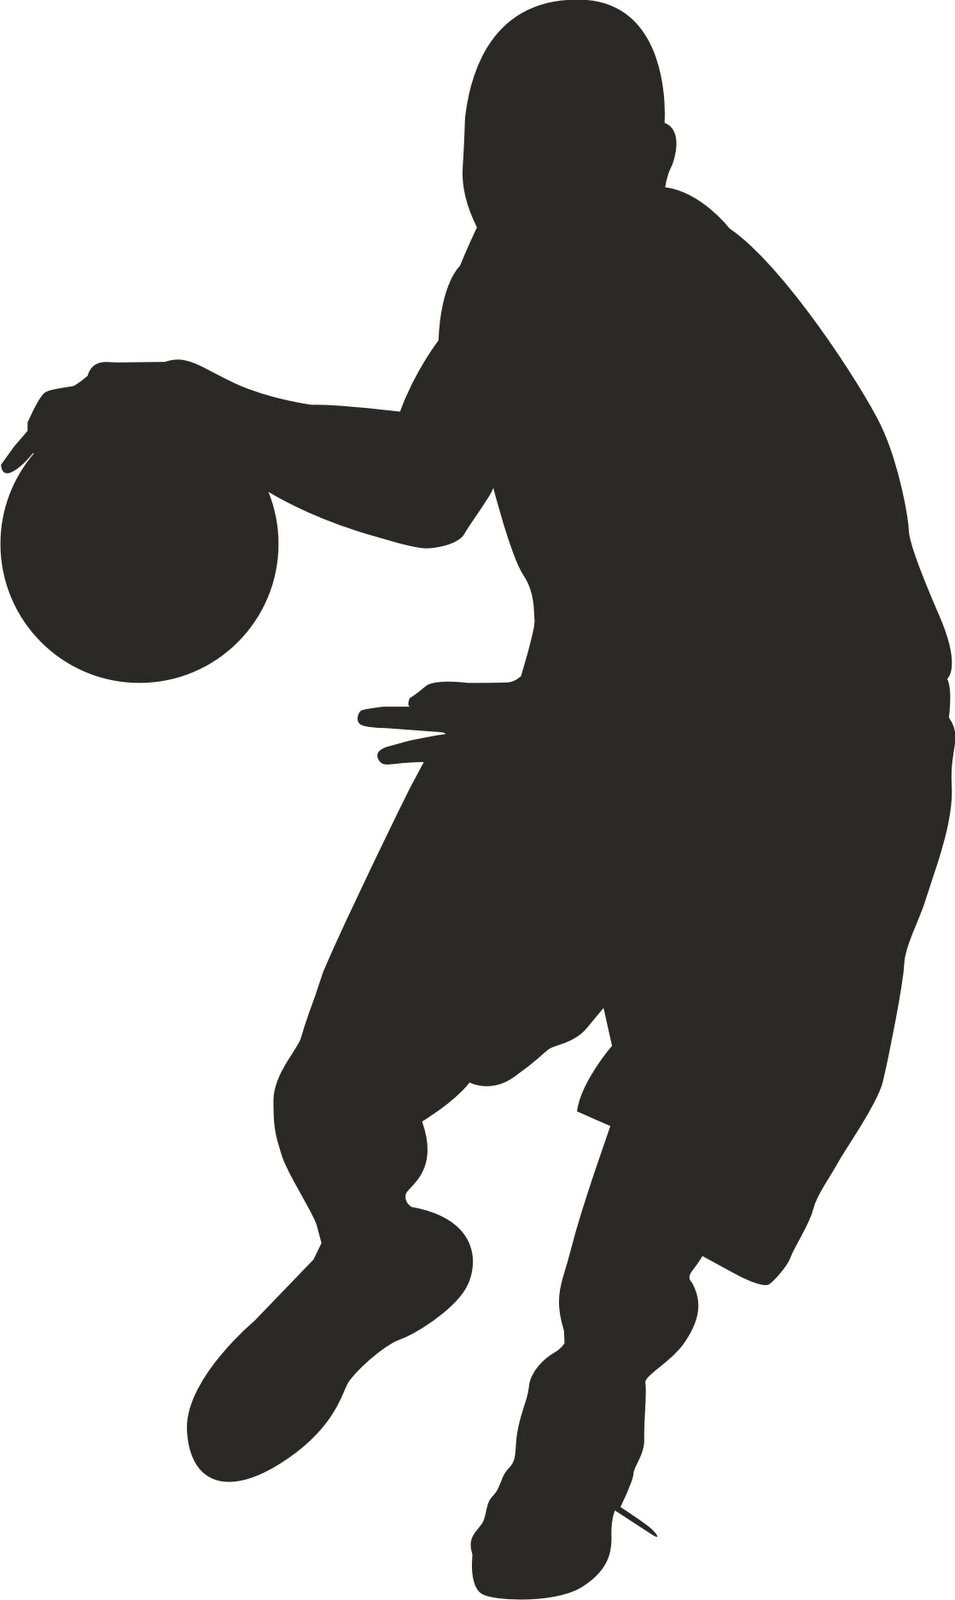 basketball player clip art 16 | Clipart library - Free Clipart Images